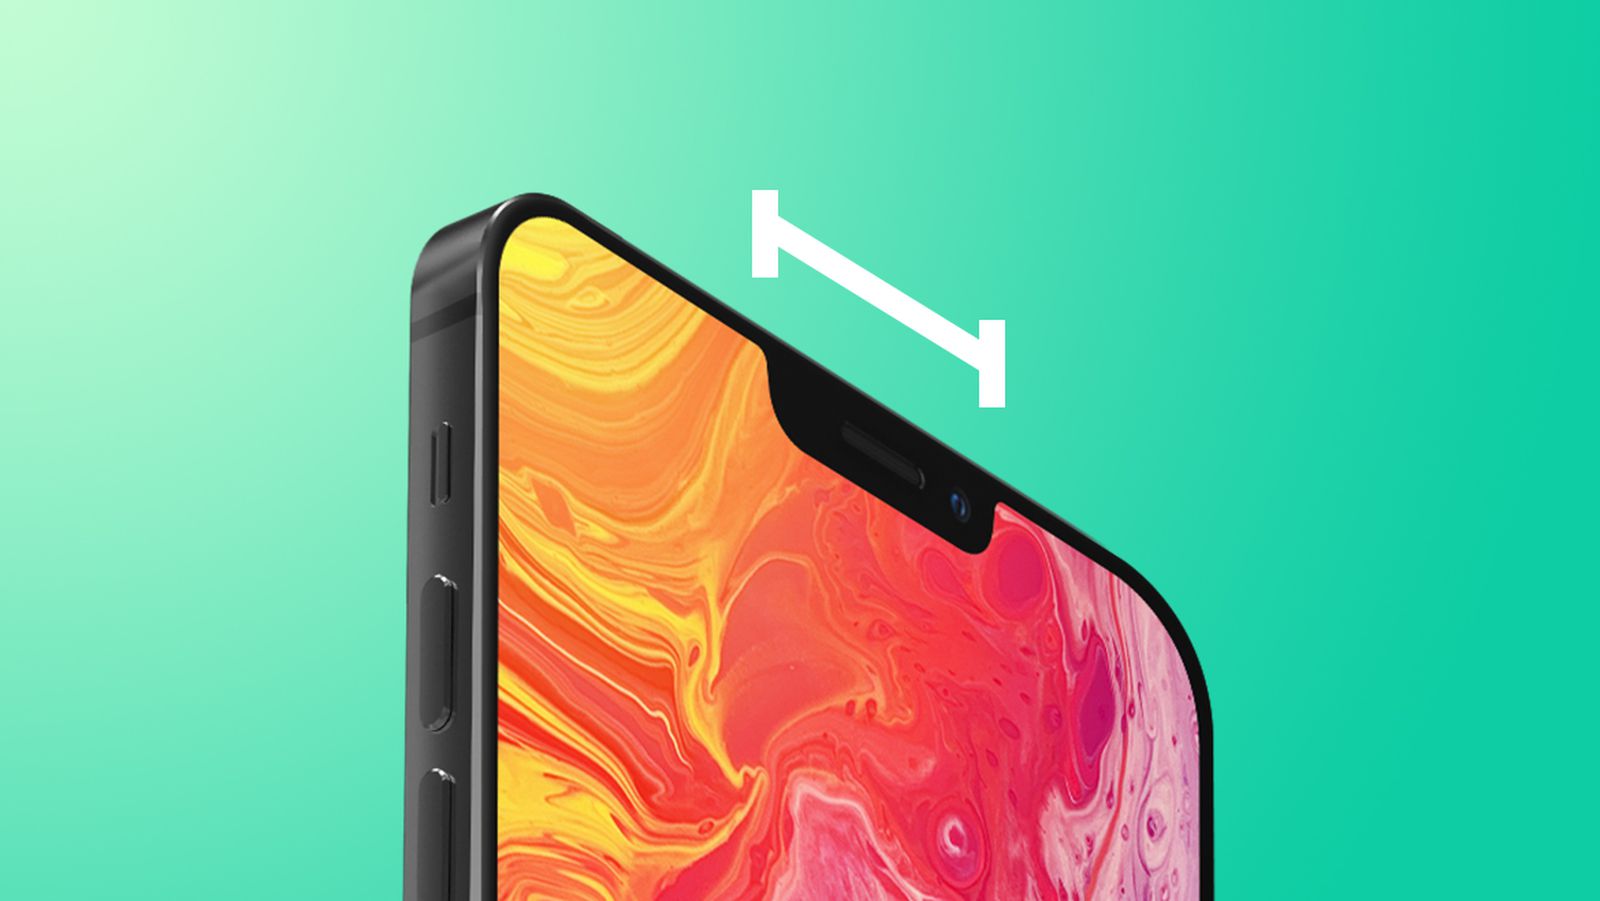 Iphone 13 Rumor Recap Smaller Notch Larger Batteries 1hz For Pro Models Improved 5g Wi Fi 6e And More Macrumors